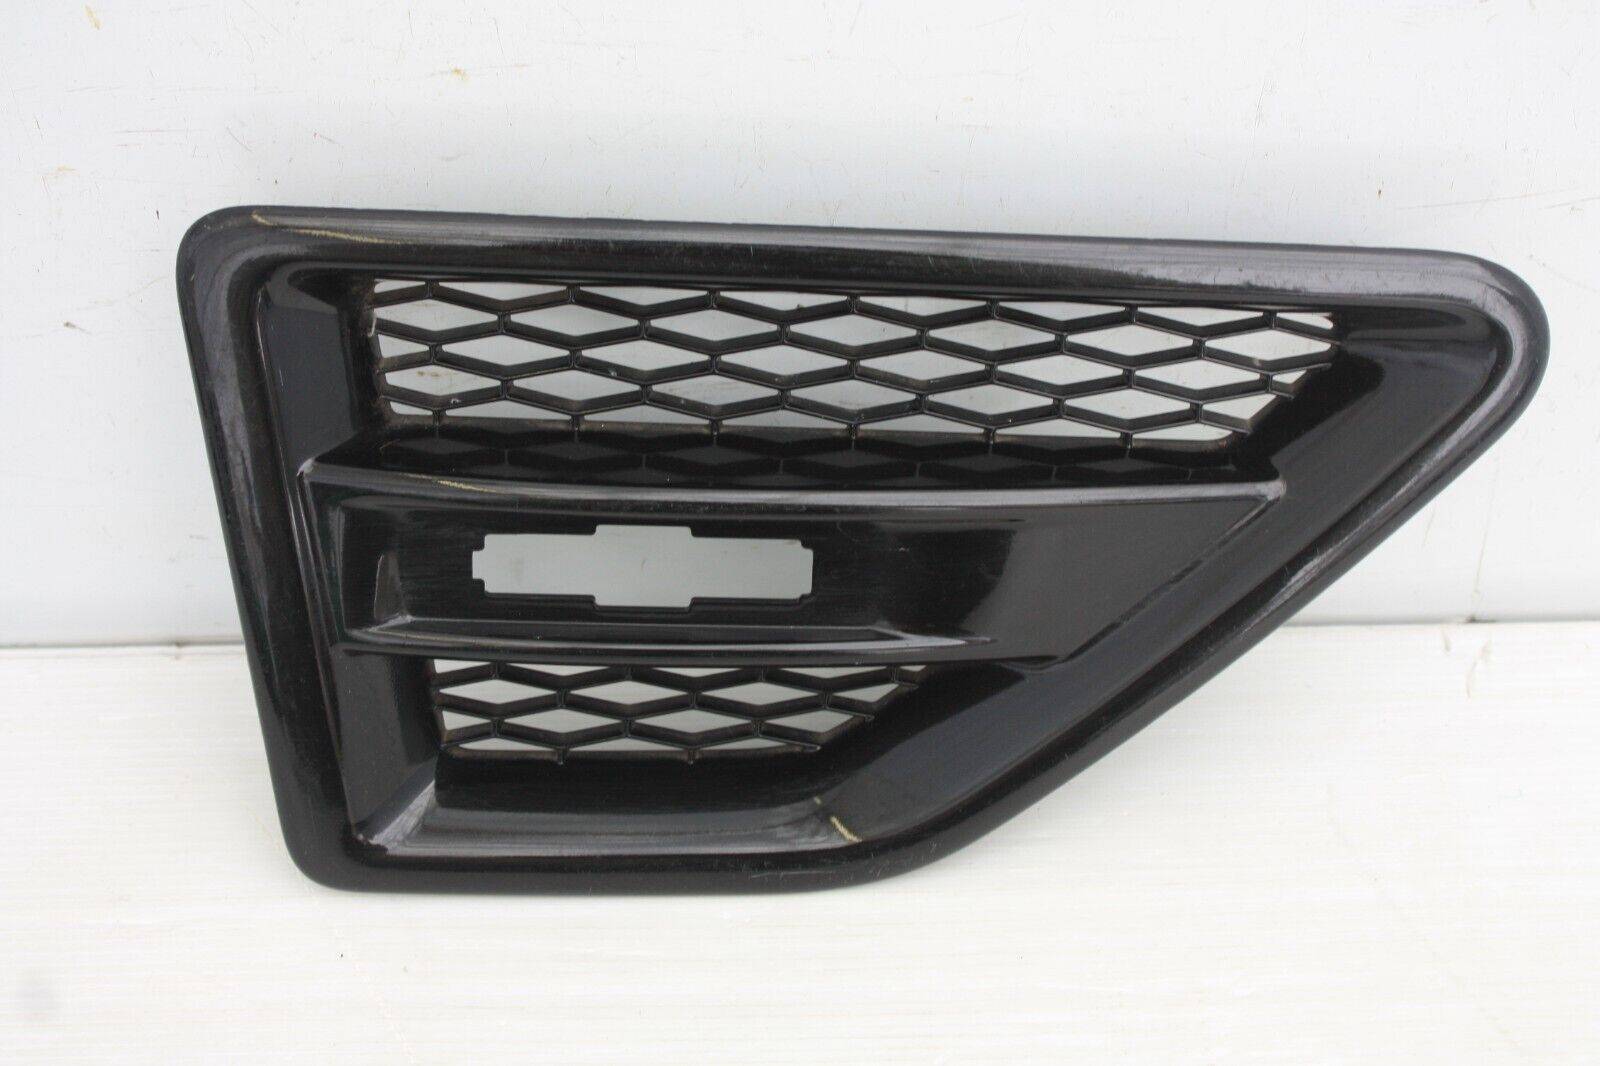 Land-Rover-Freelander-Front-Right-Side-Wing-Grill-2007-to-2015-6H52-014K80-BB-176267107753